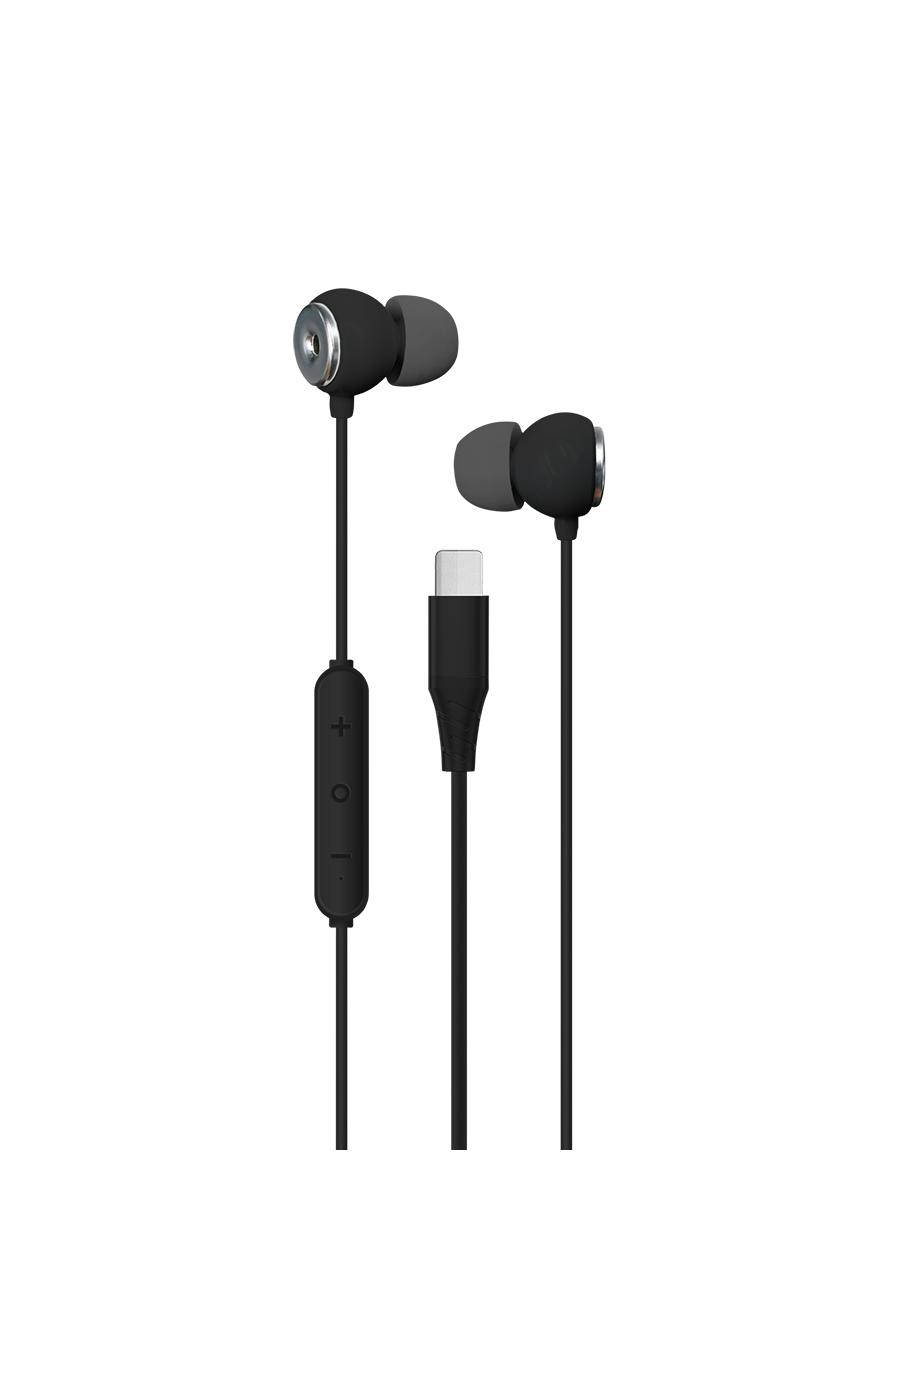 Helix Ultra USB-C Earbuds - Black; image 2 of 2